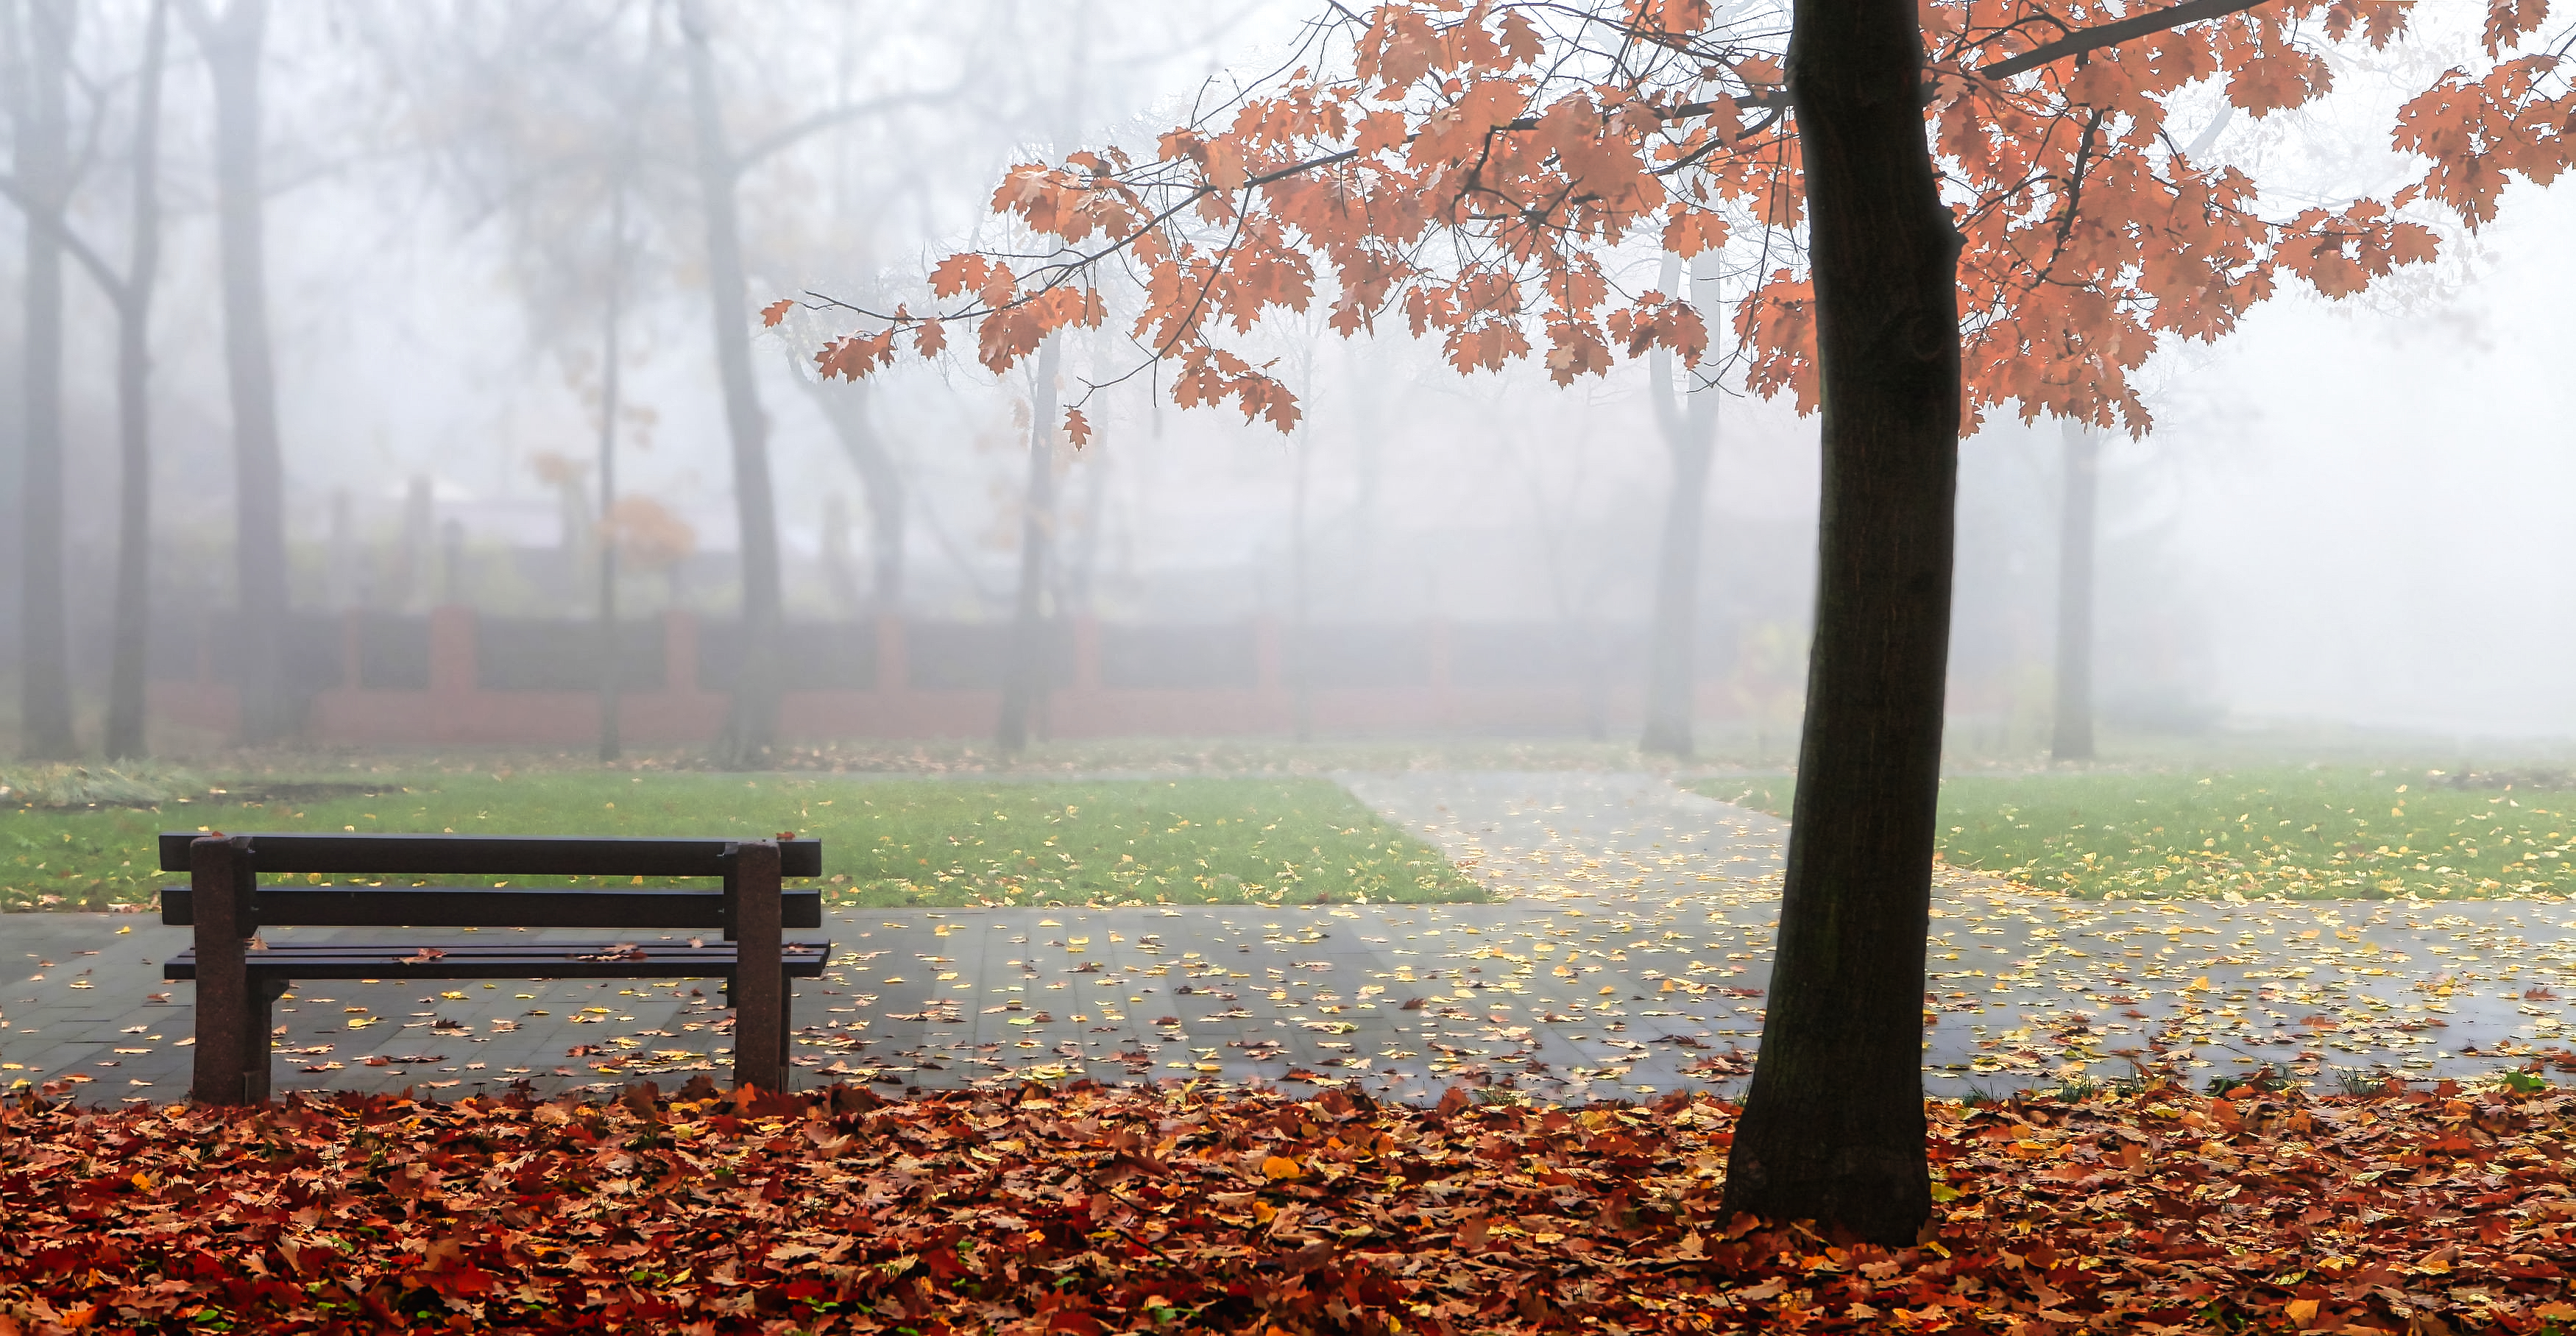 General 3500x1815 Milokost Alexey bench trees leaves fall mist path urban nature outdoors photography